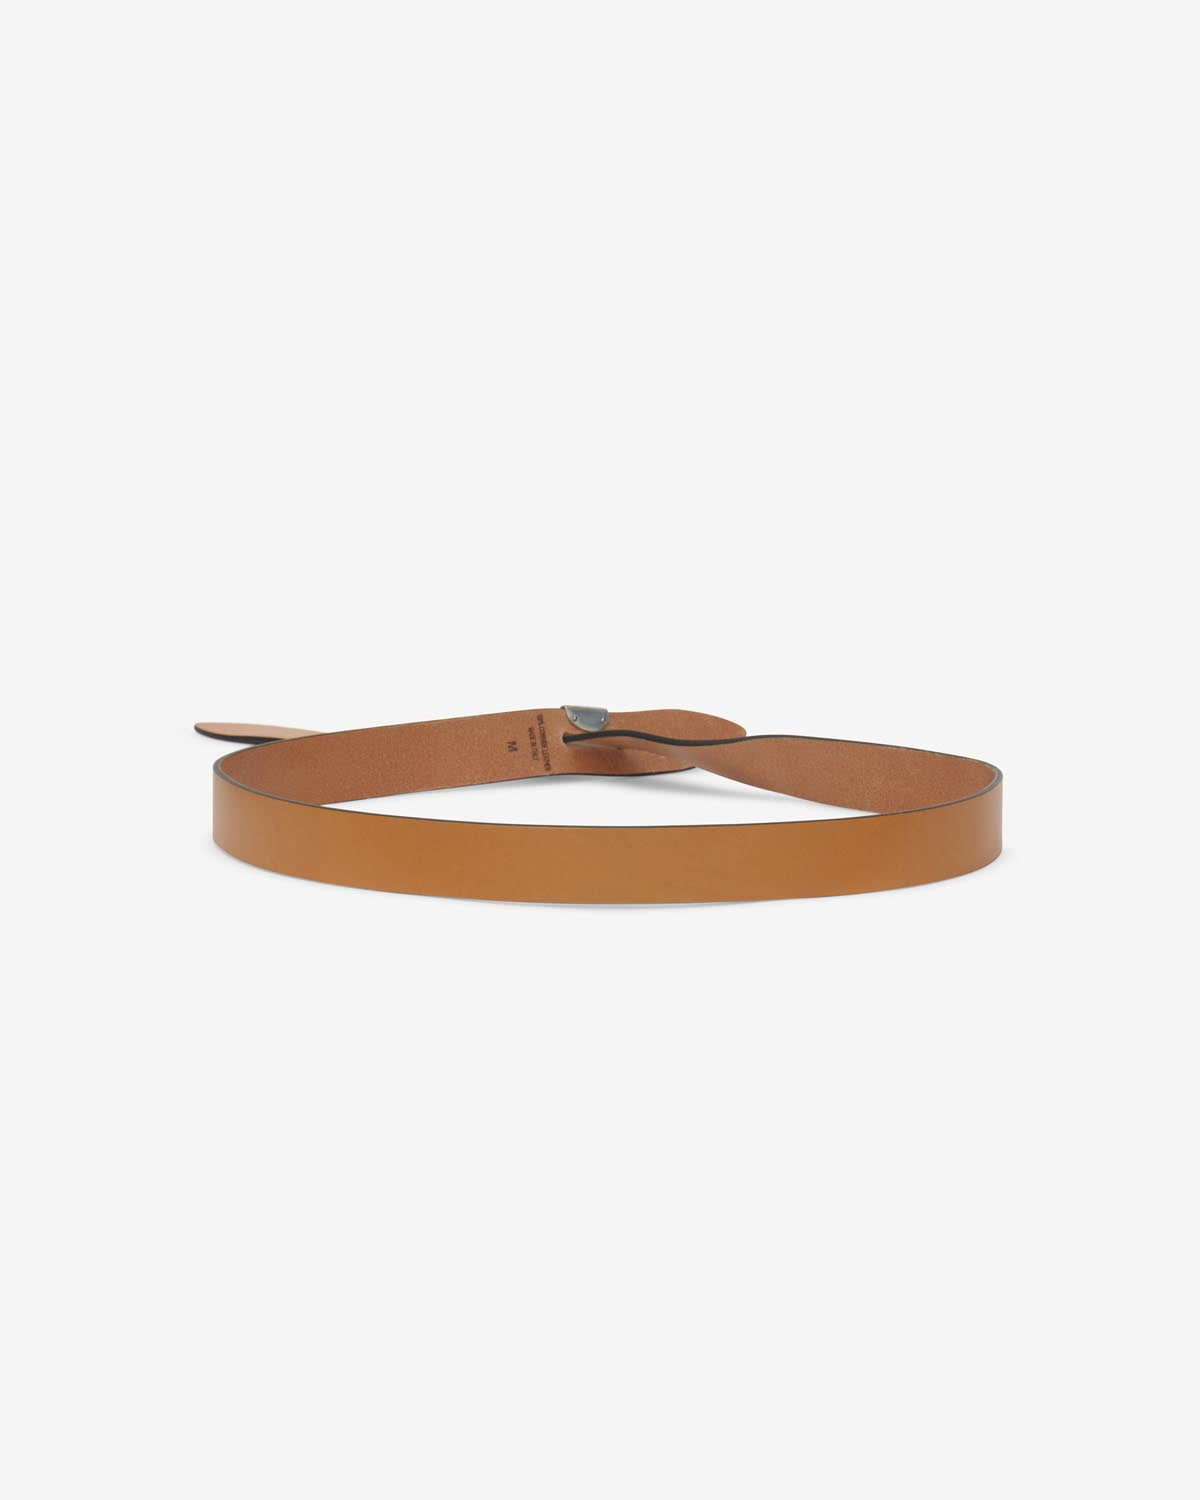 Lecce Belt Woman natural | ISABEL MARANT Official online store